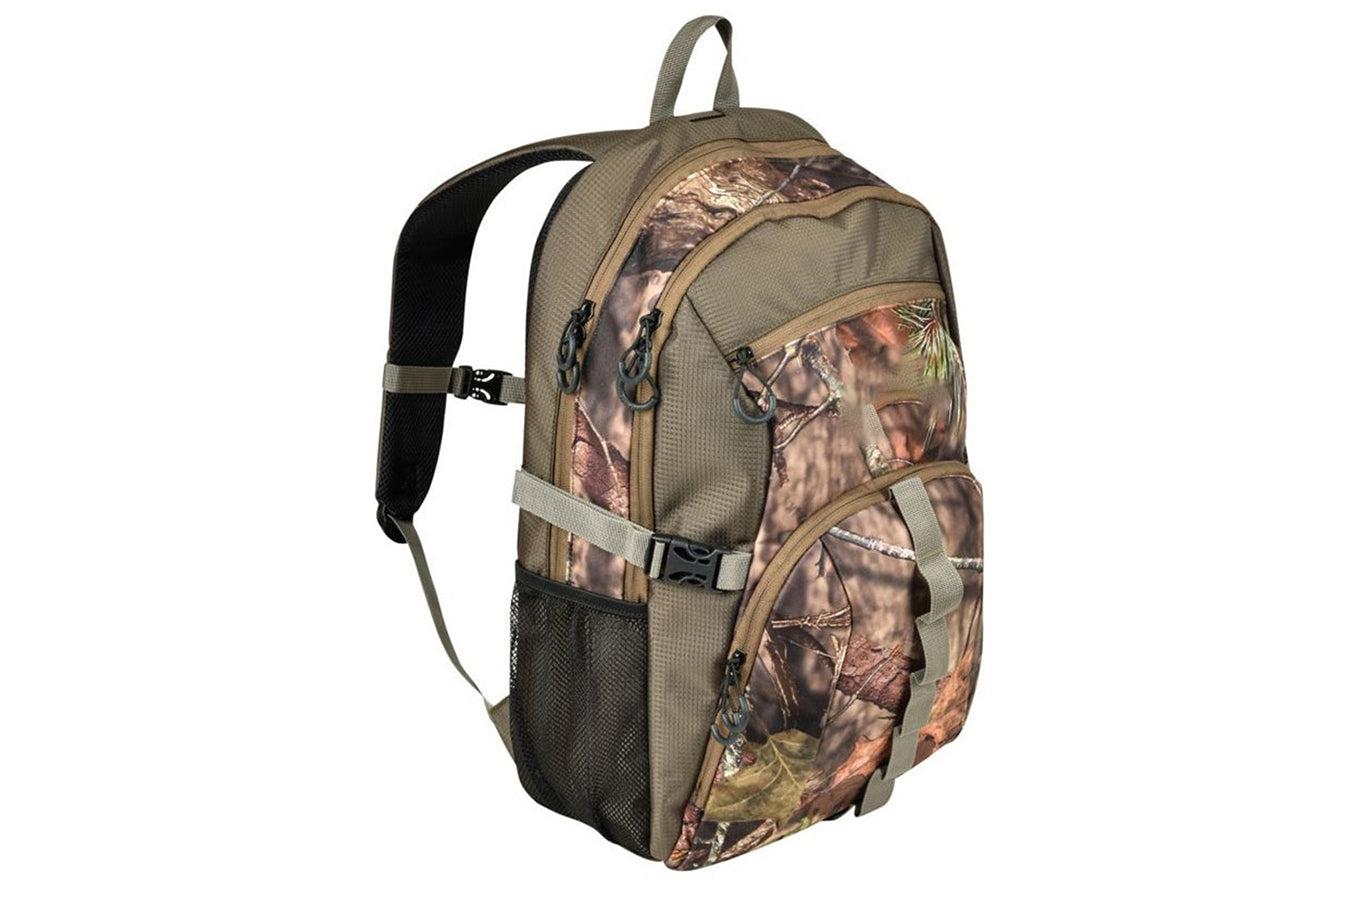 HQ DAY PACK - 24 LITRES - BREAK-UP COUNTRY CAMO